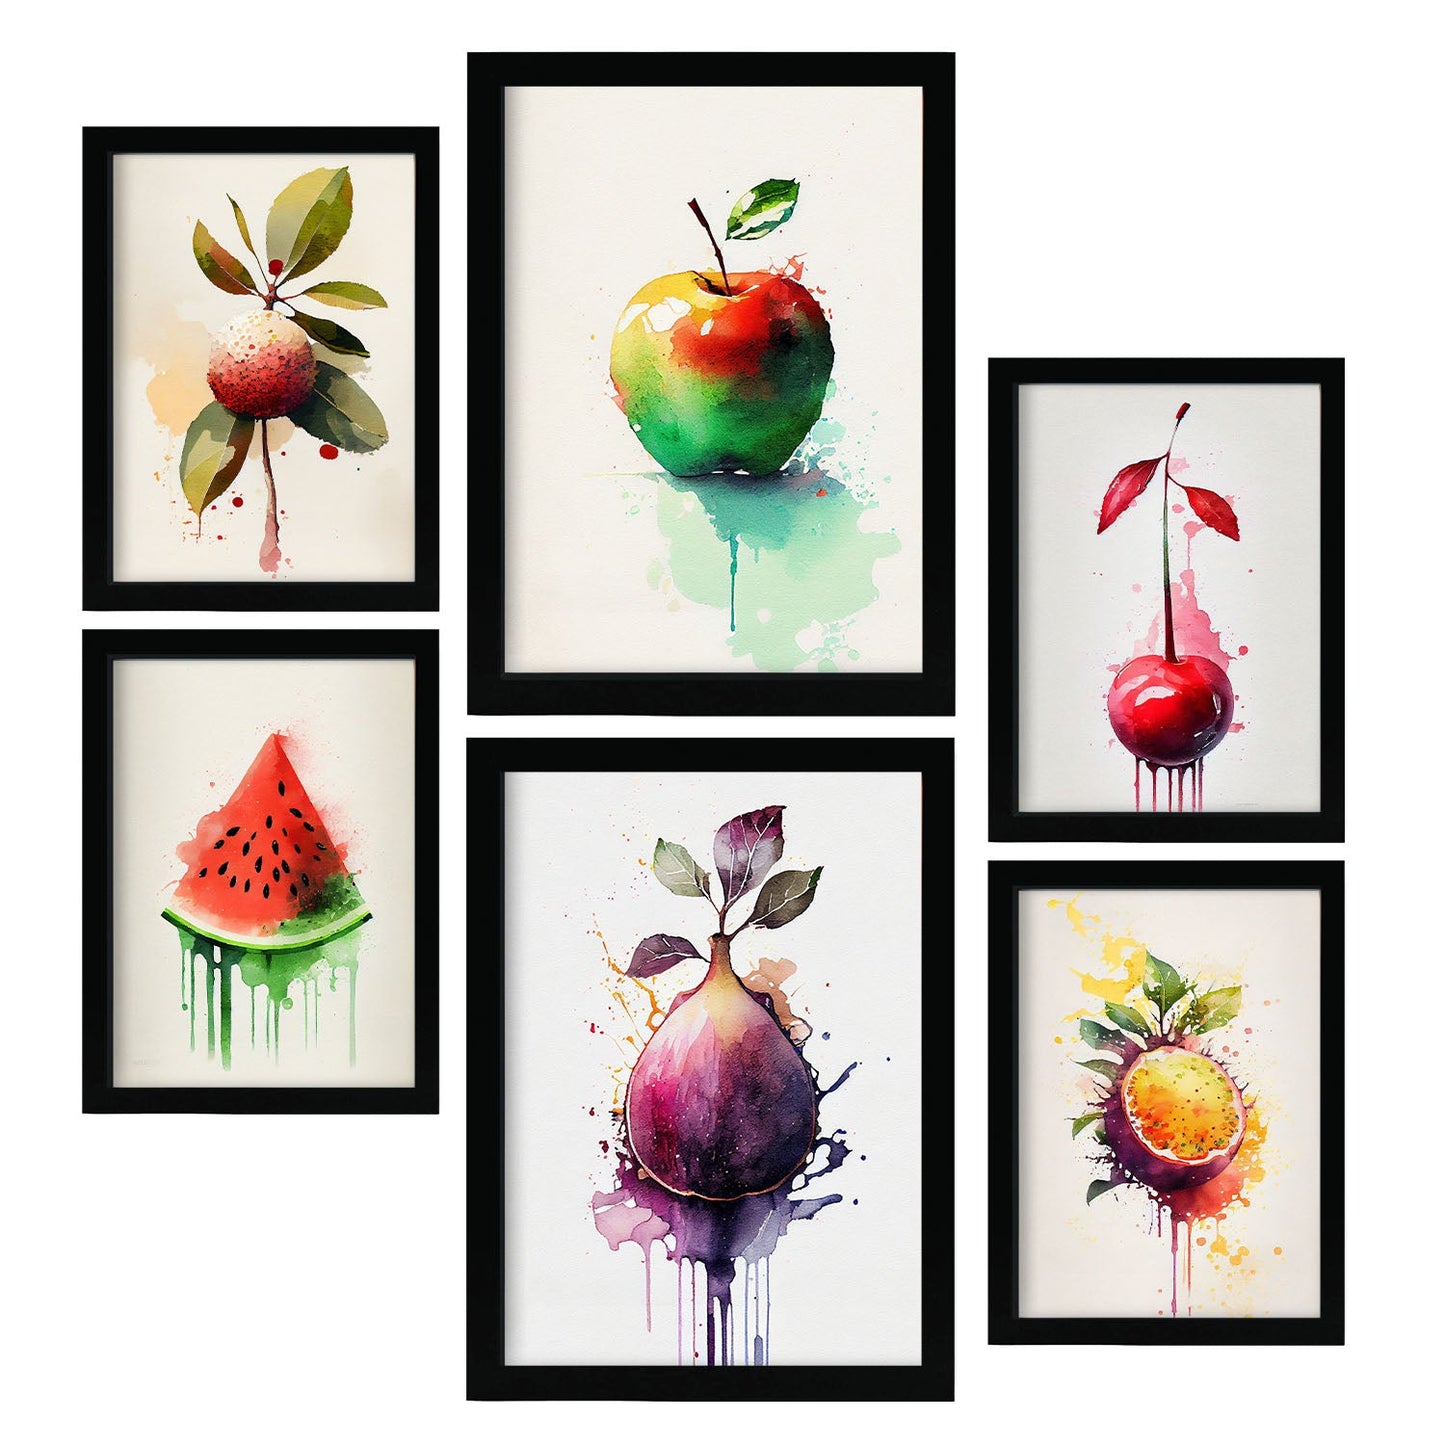 Nacnic Watercolor Fruits Set_05. Aesthetic Wall Art Prints for Bedroom or Living Room Design.